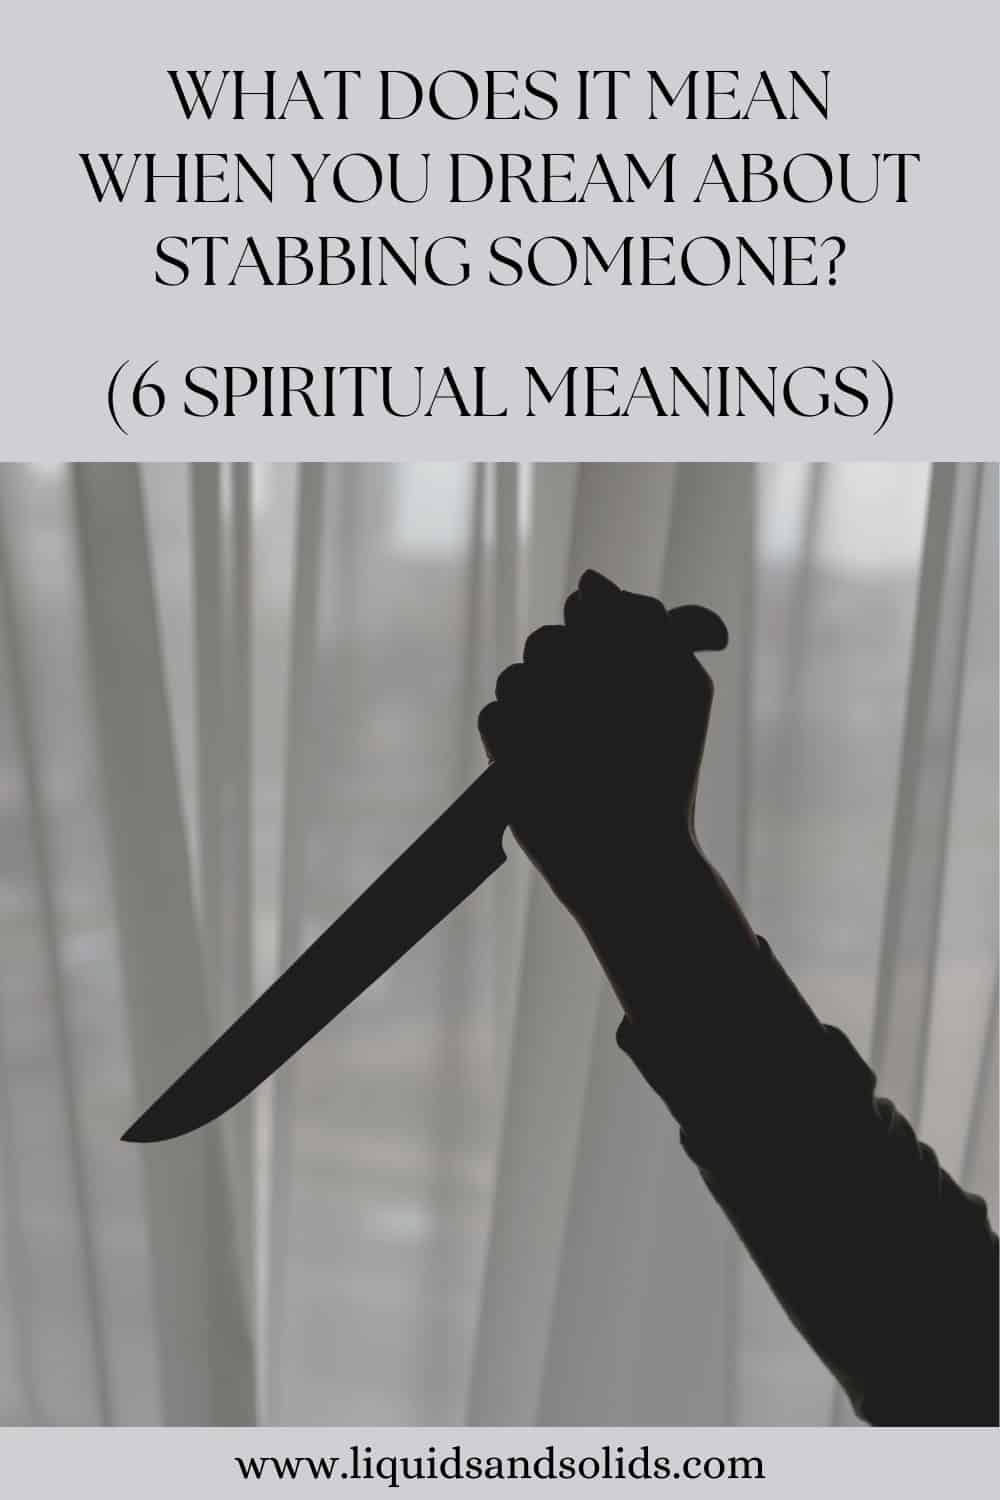 What Does it Mean When You Dream About Stabbing Someone? (6 Spiritual Meanings)